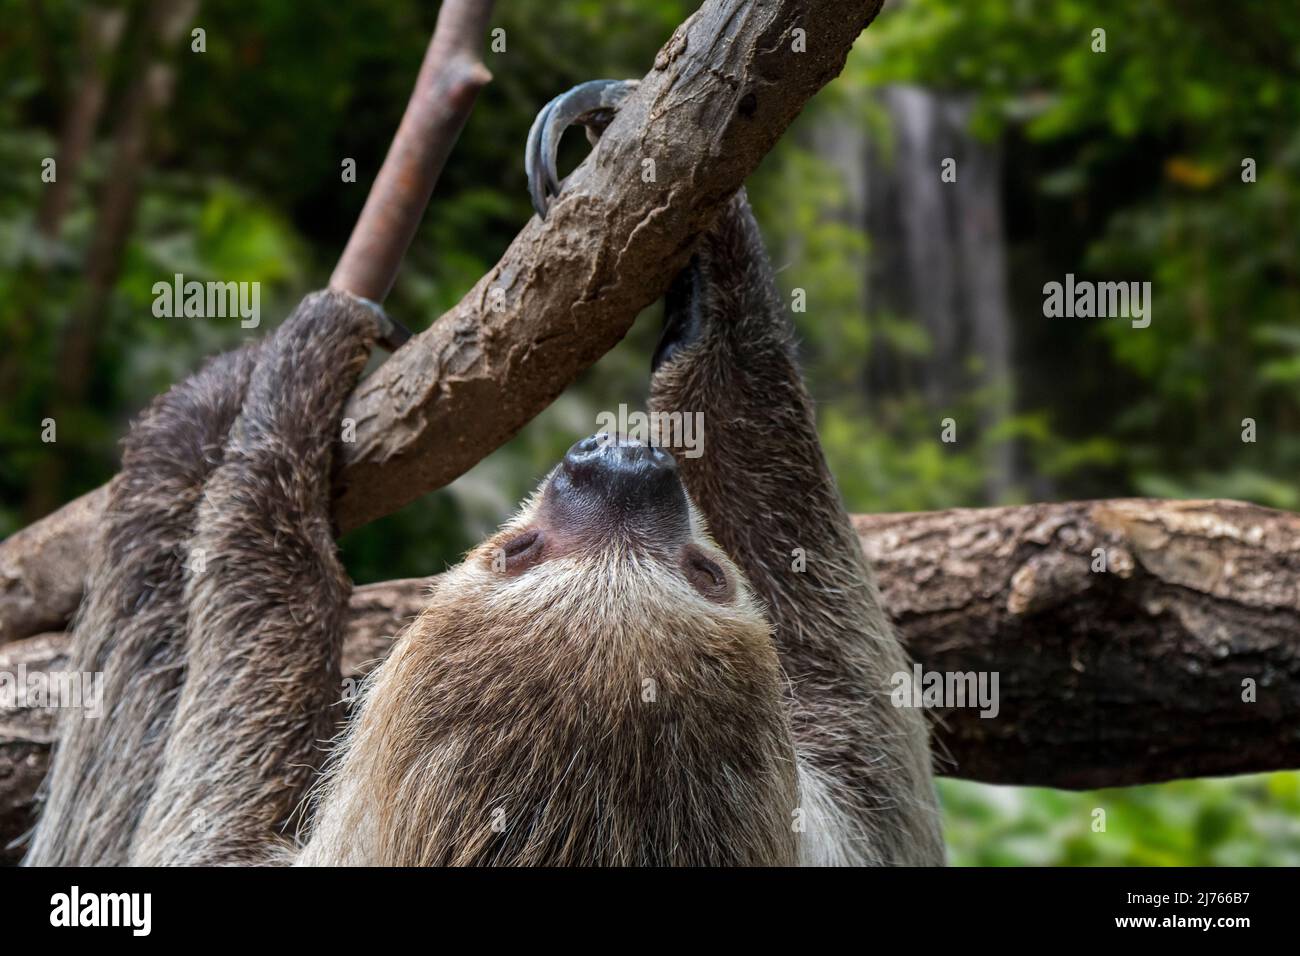 Linnaeus's two-toed sloth / southern two-toed sloth / Linne's two-toed sloth (Choloepus didactylus / Bradypus didactylus) climbing tree in rain forest Stock Photo